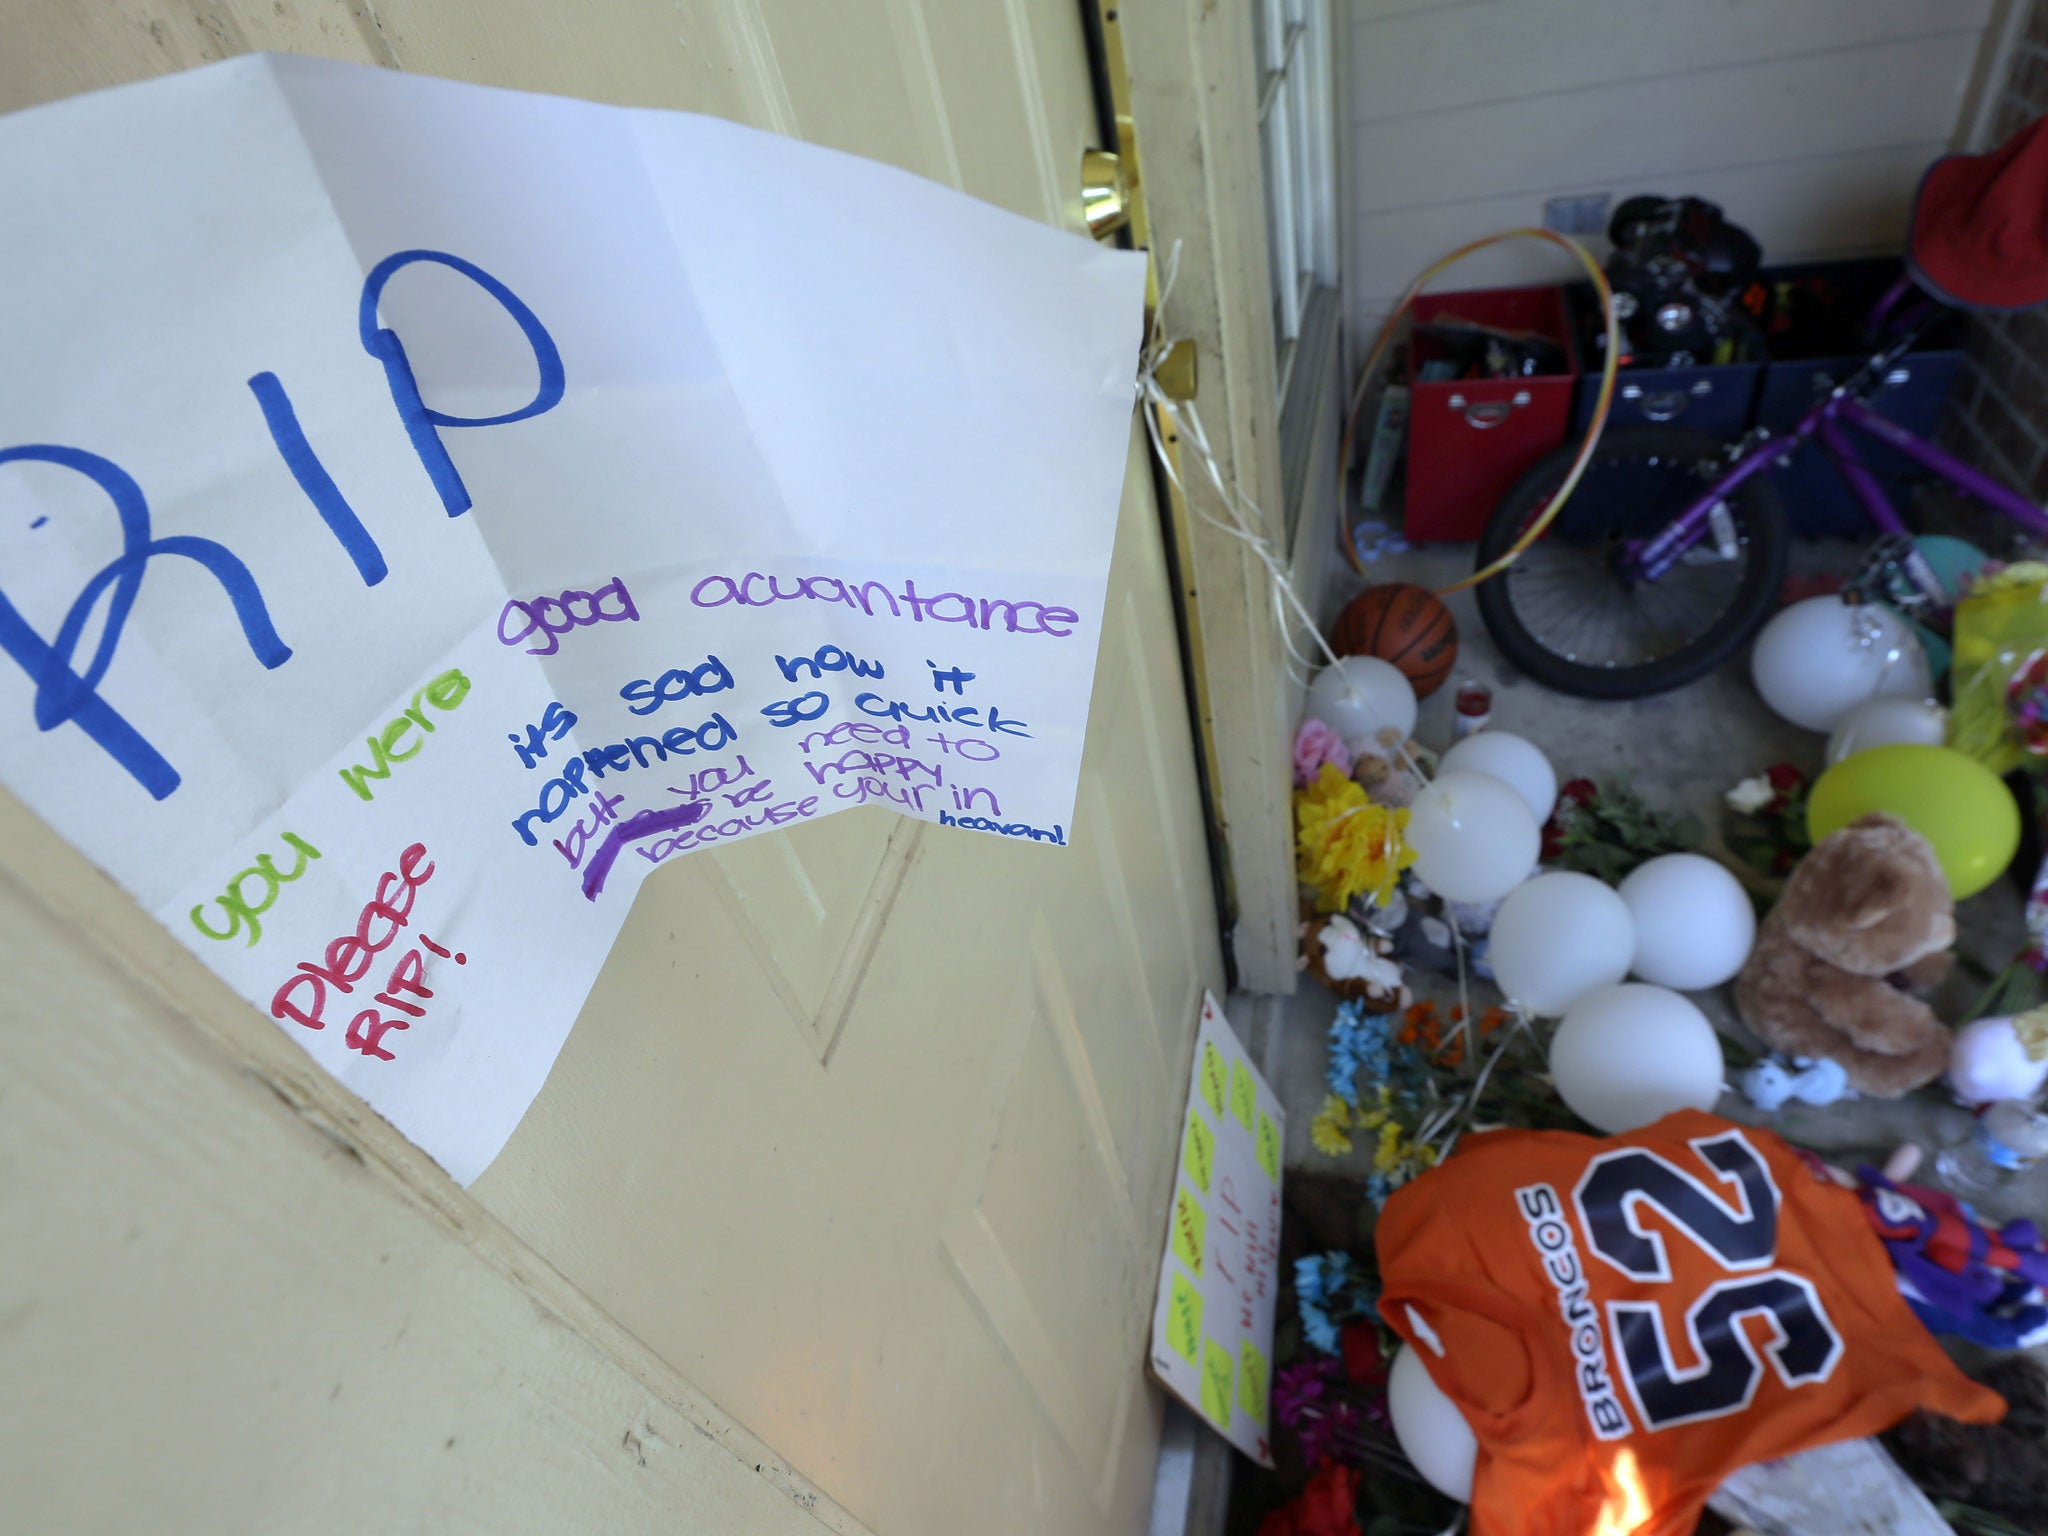 Condolences left outside the home where eight people were shot, allegedly by David Conley